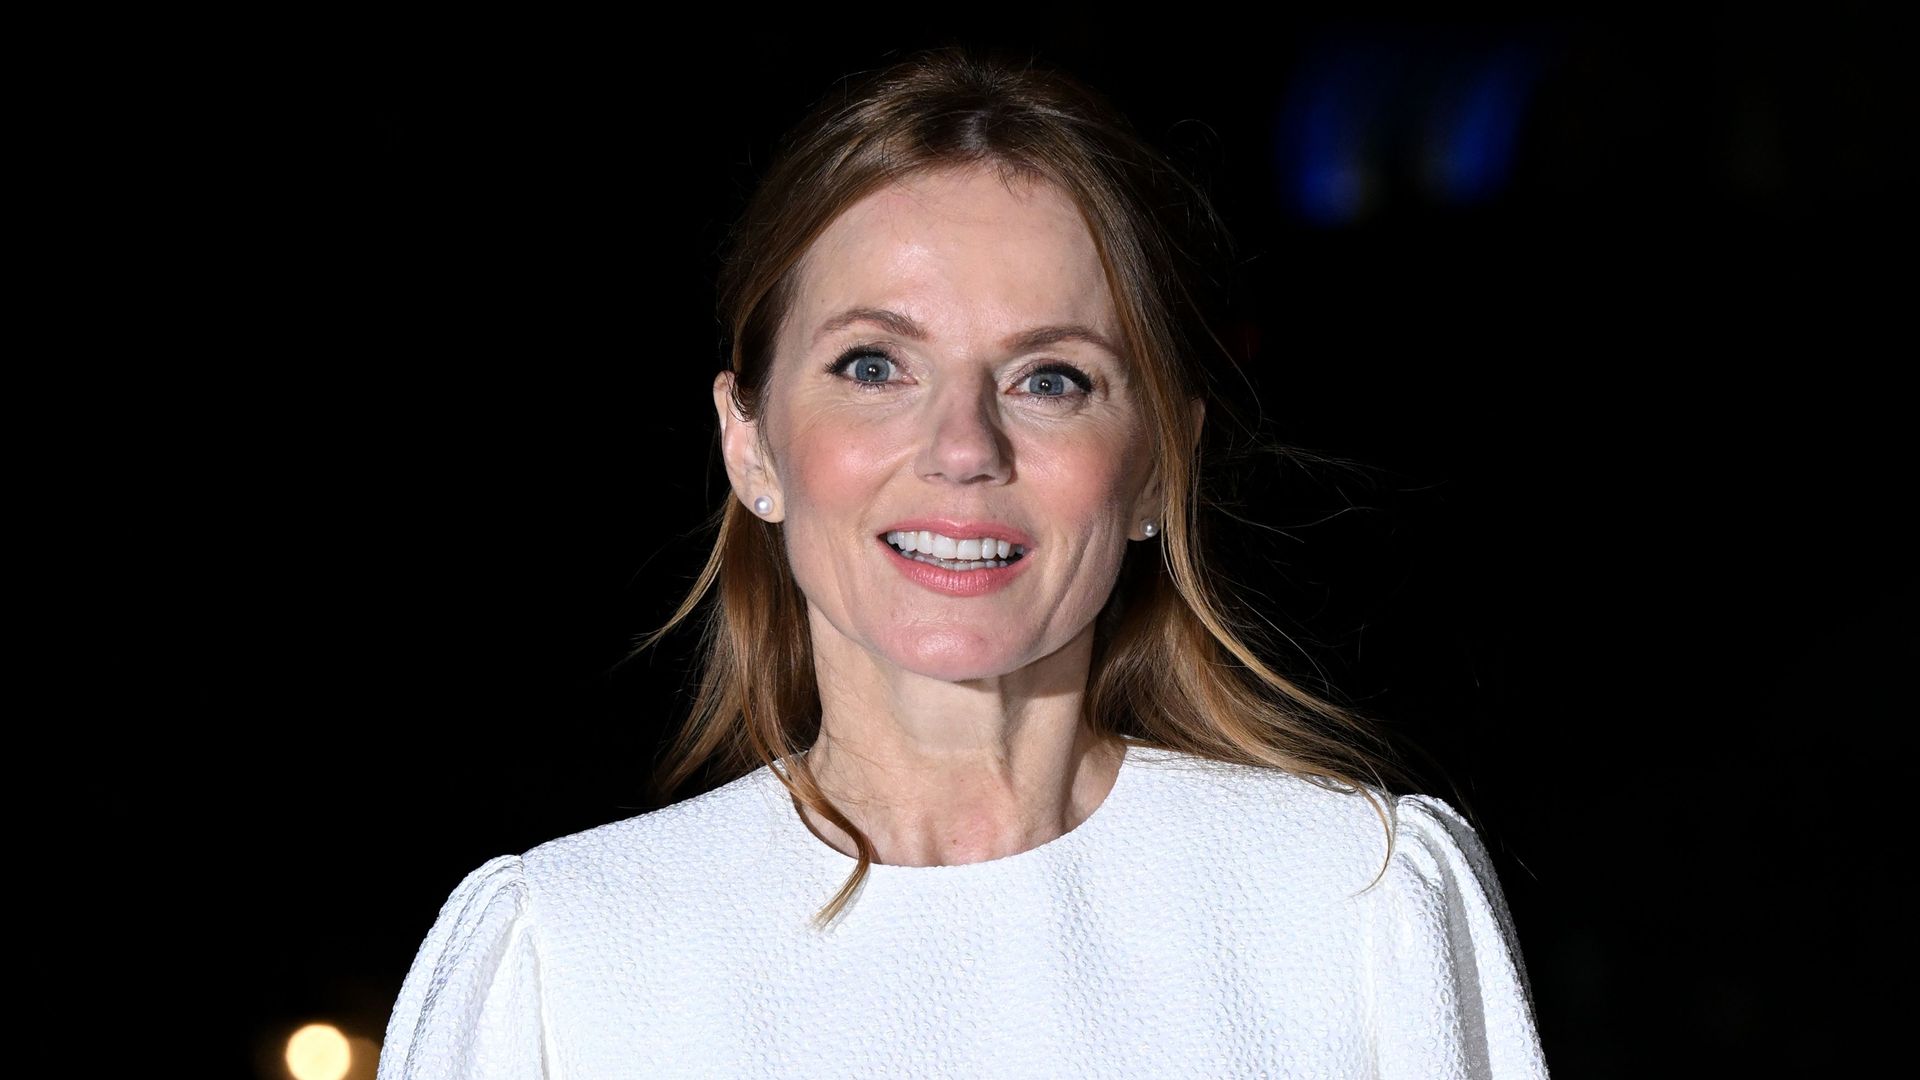 Geri Halliwell in a white outfit